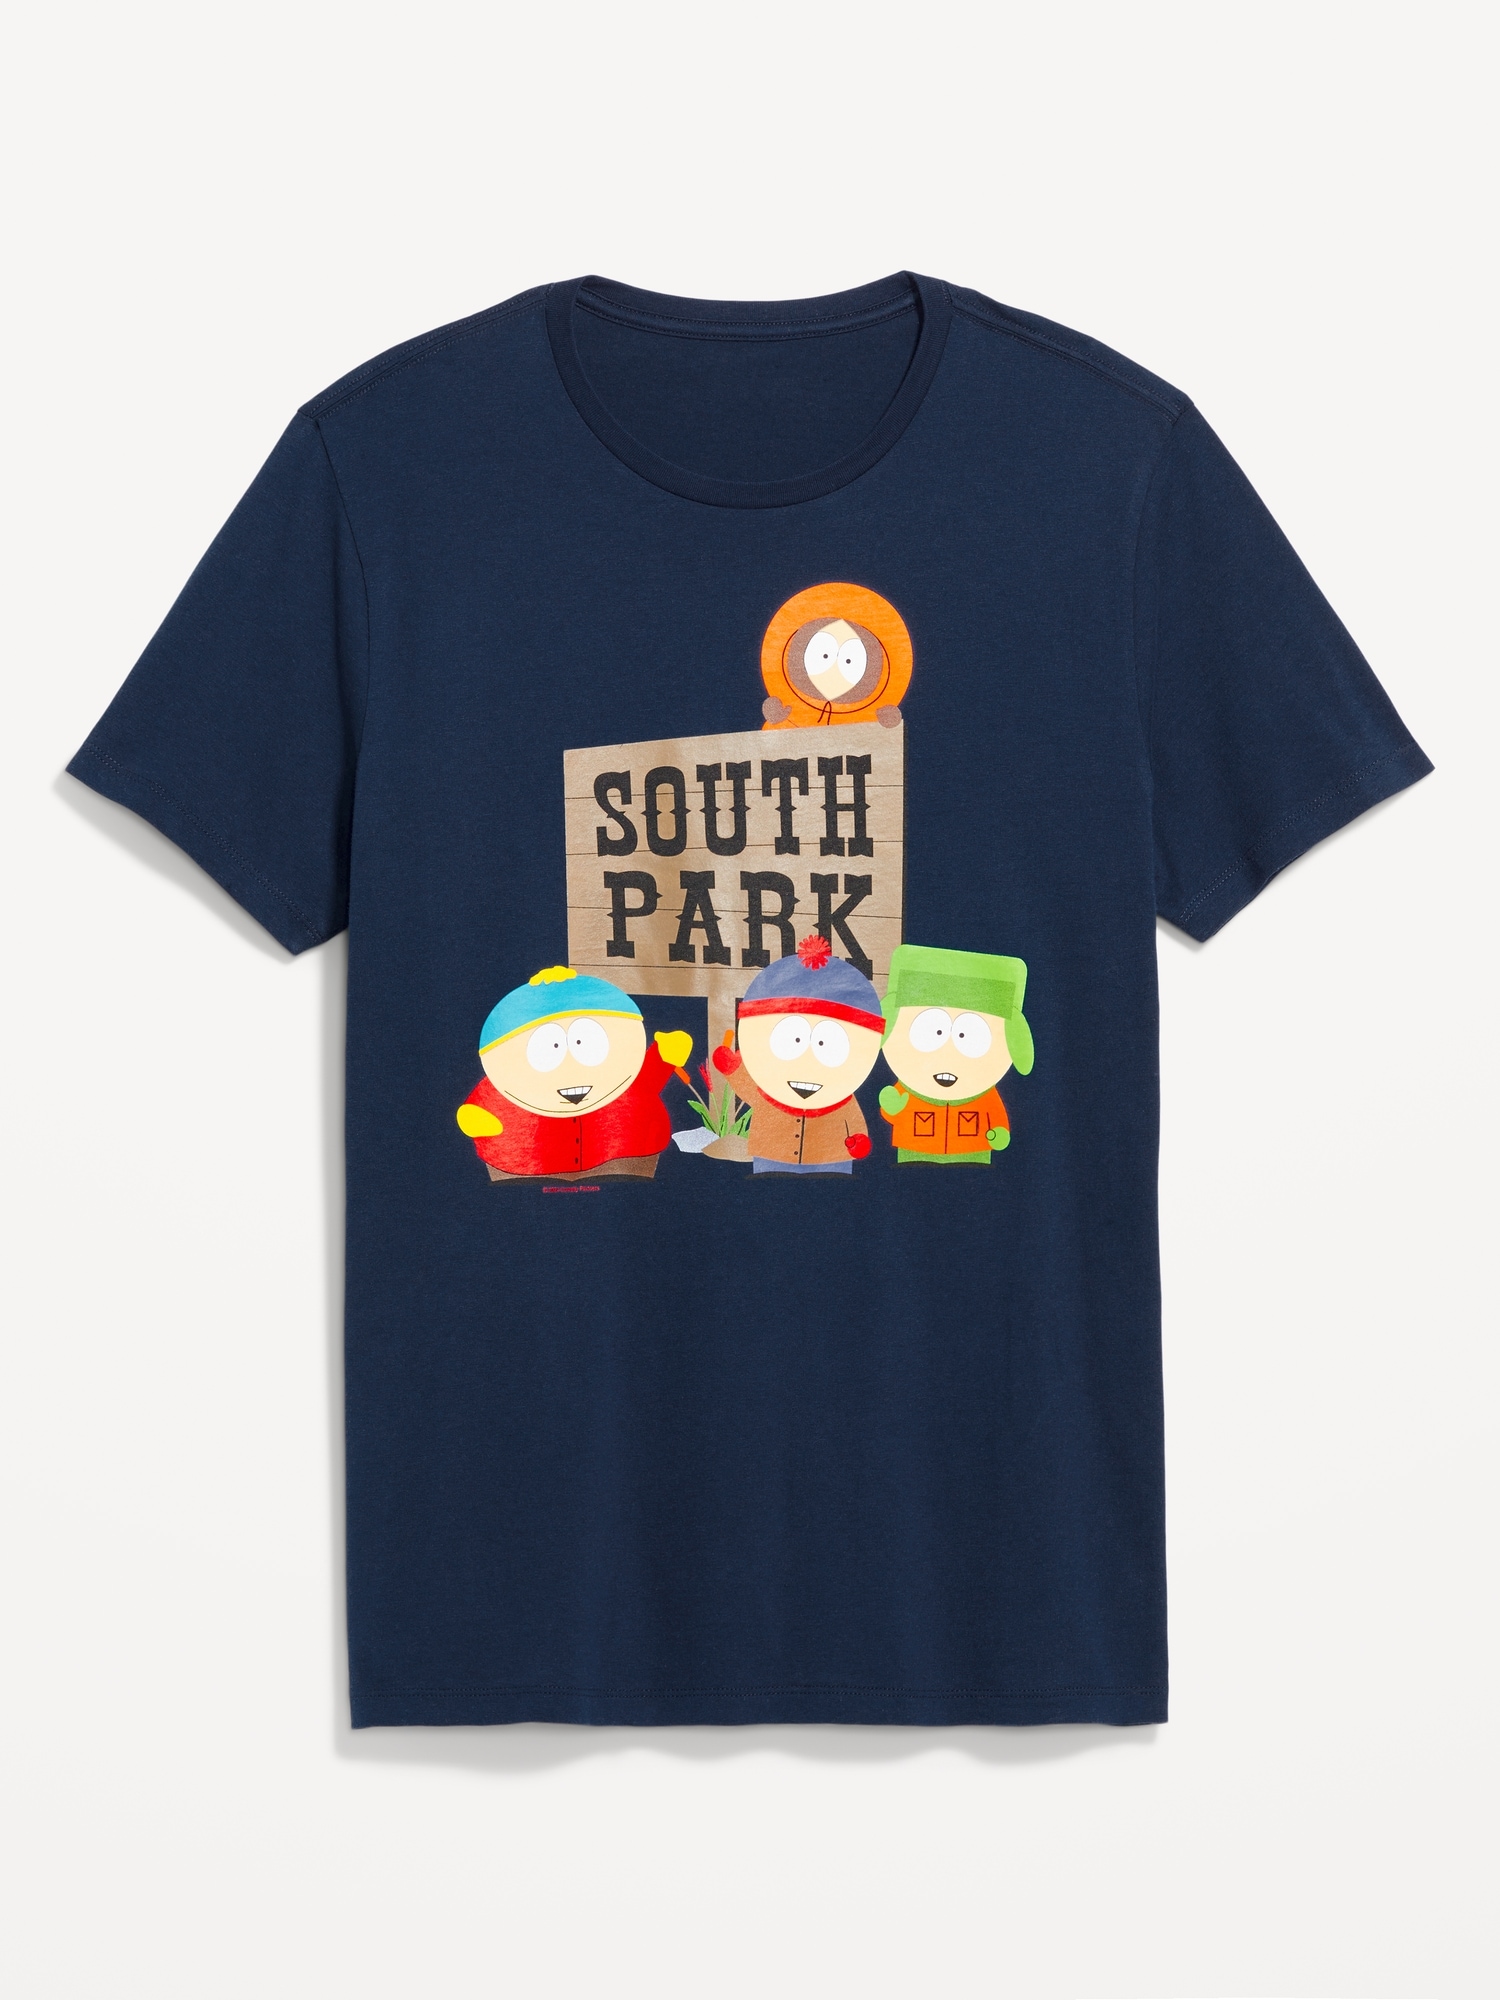 South Park© Gender-Neutral T-Shirt for Adults